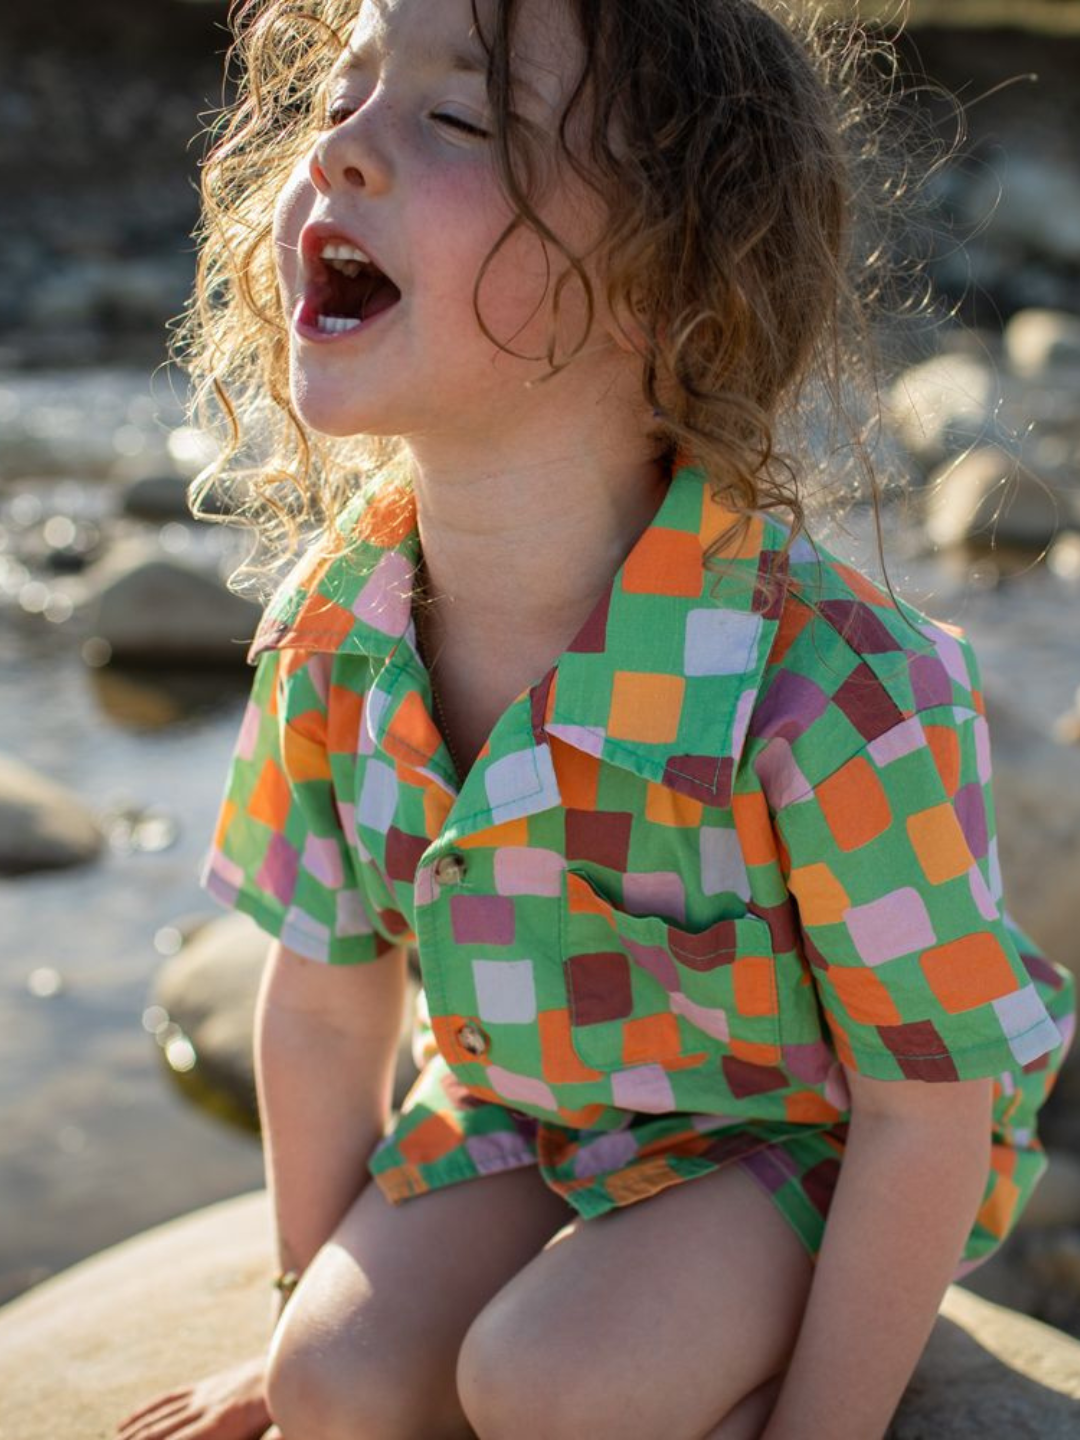 Green | A child sitting on rocks, wearing a kids' shirt and shorts set in a pattern of purple, pink, gold and orange squares on a green background